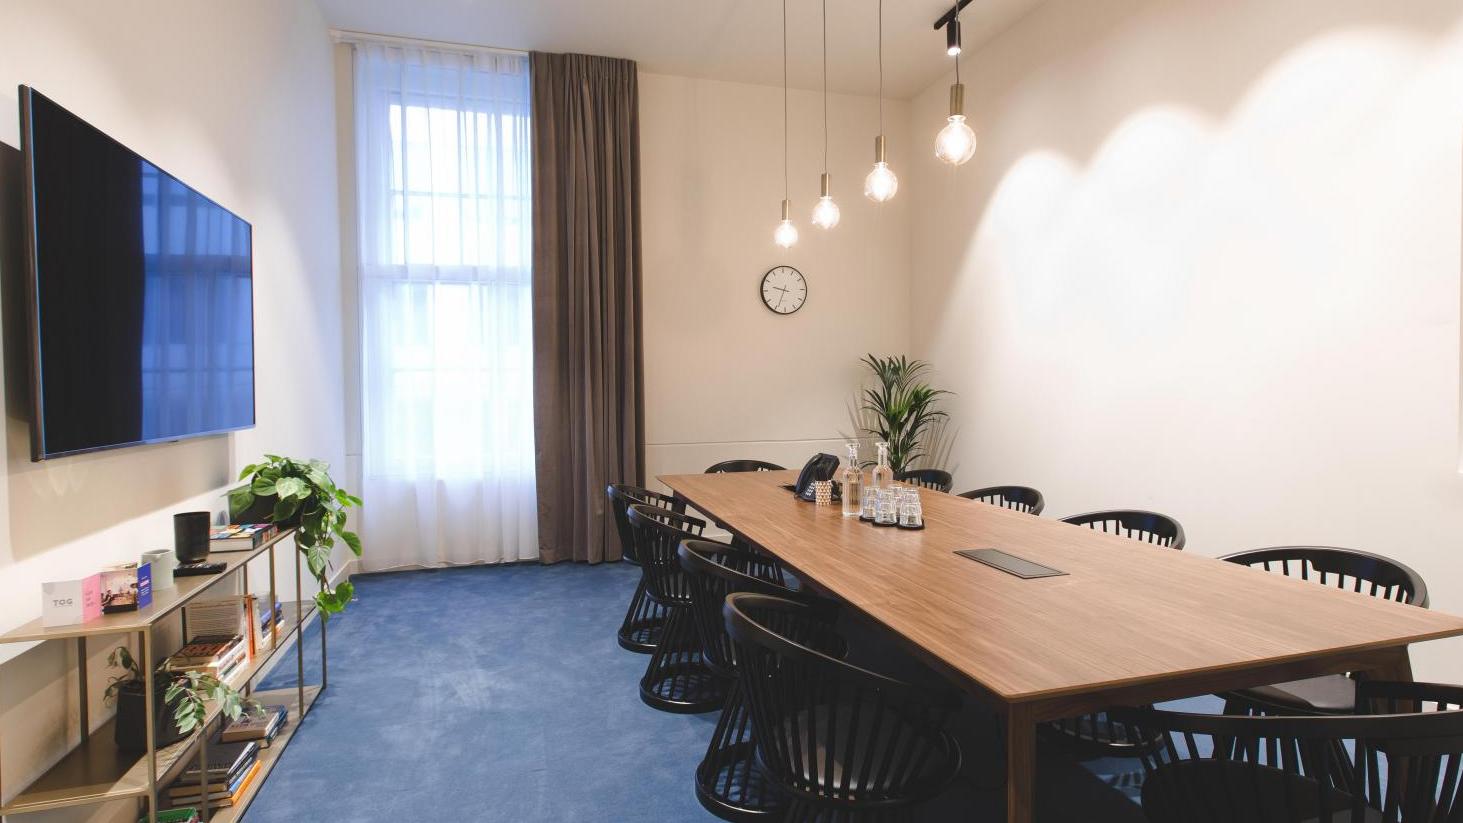 Meeting Rooms for Hire in Victoria